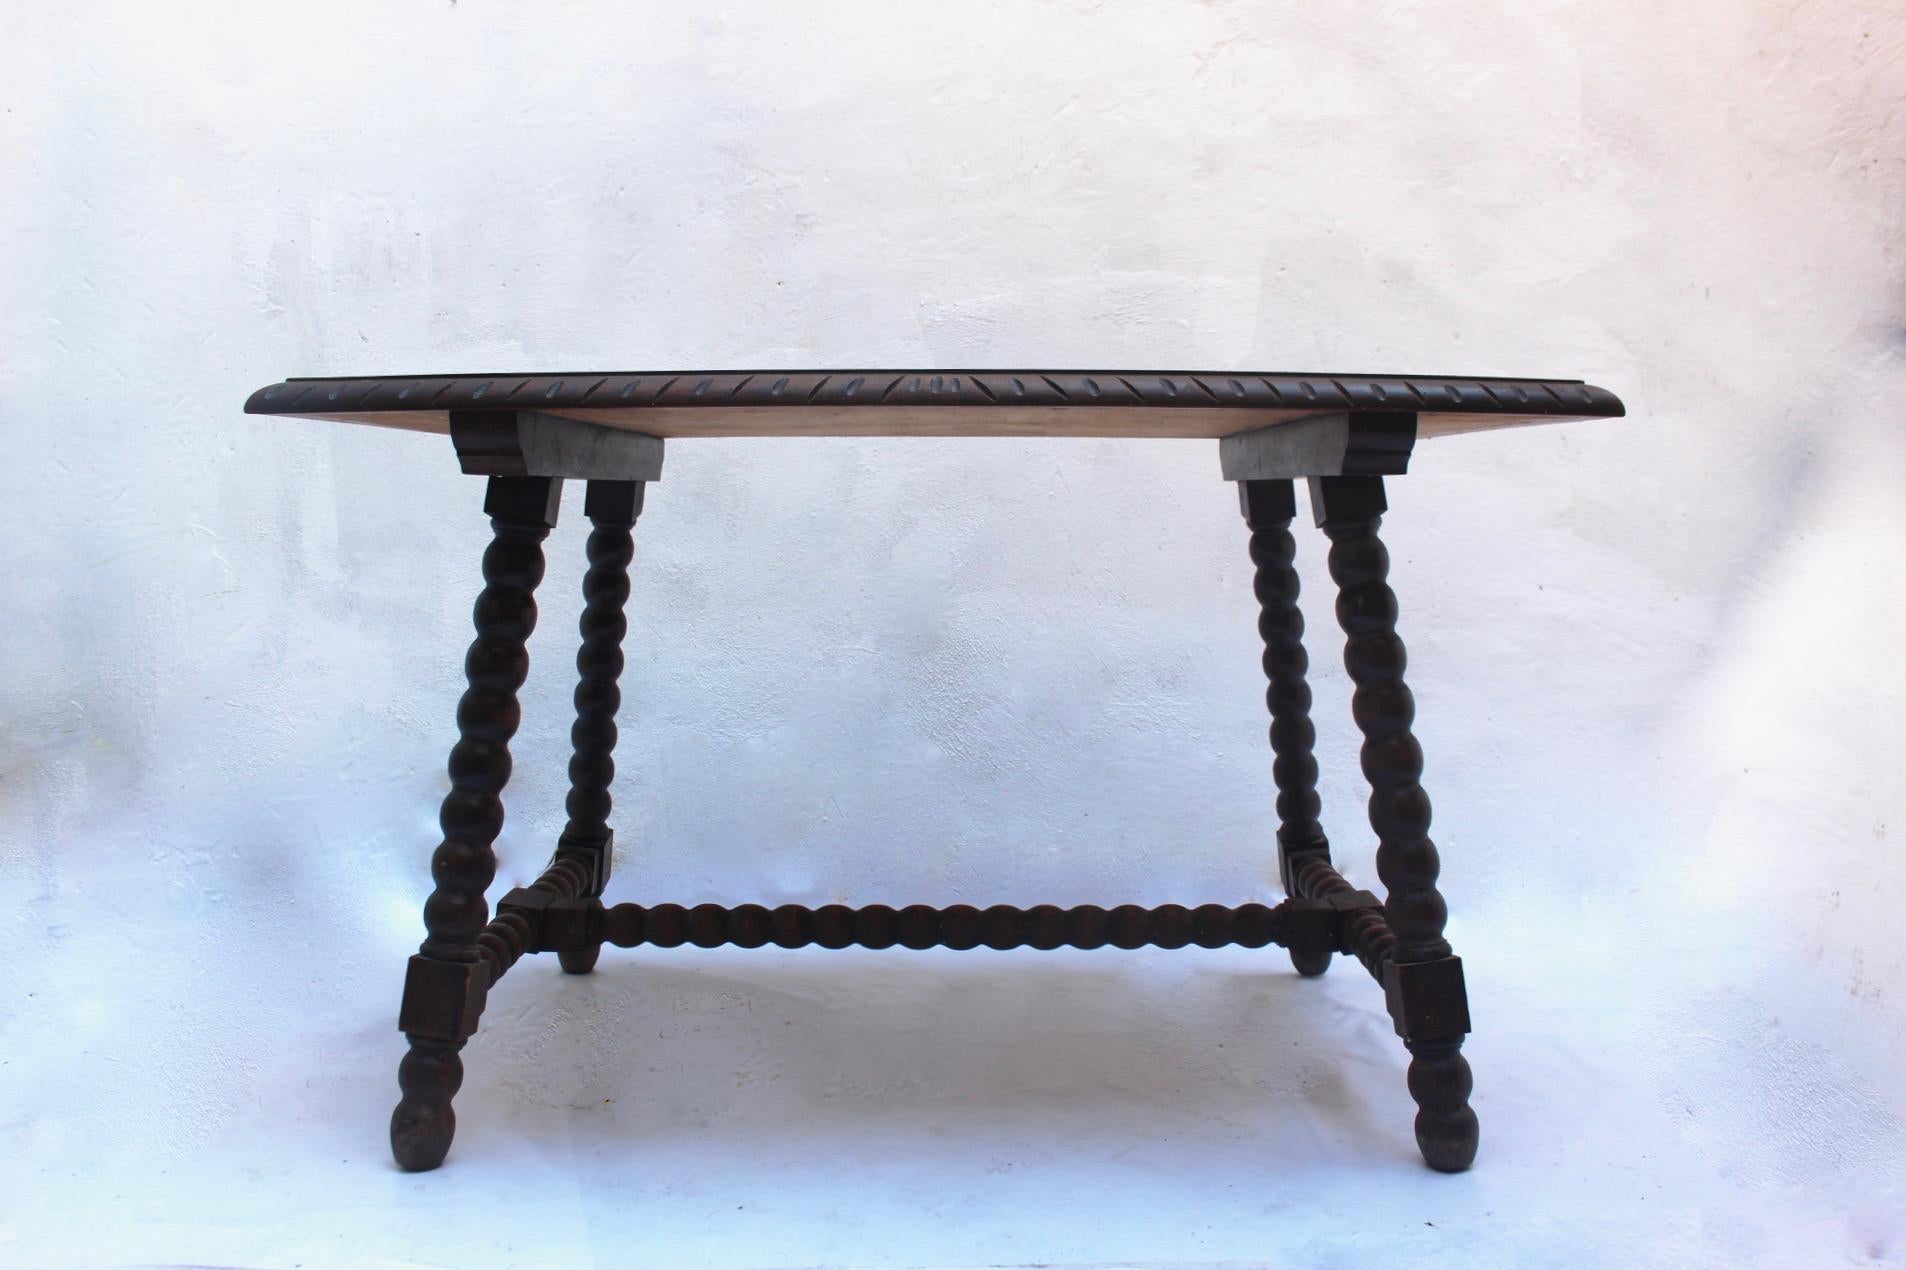 Baroque revival hand carved wood dining table made in Spain, 19th century. Perfect for 6 people, like it is appreciable at the pictures.